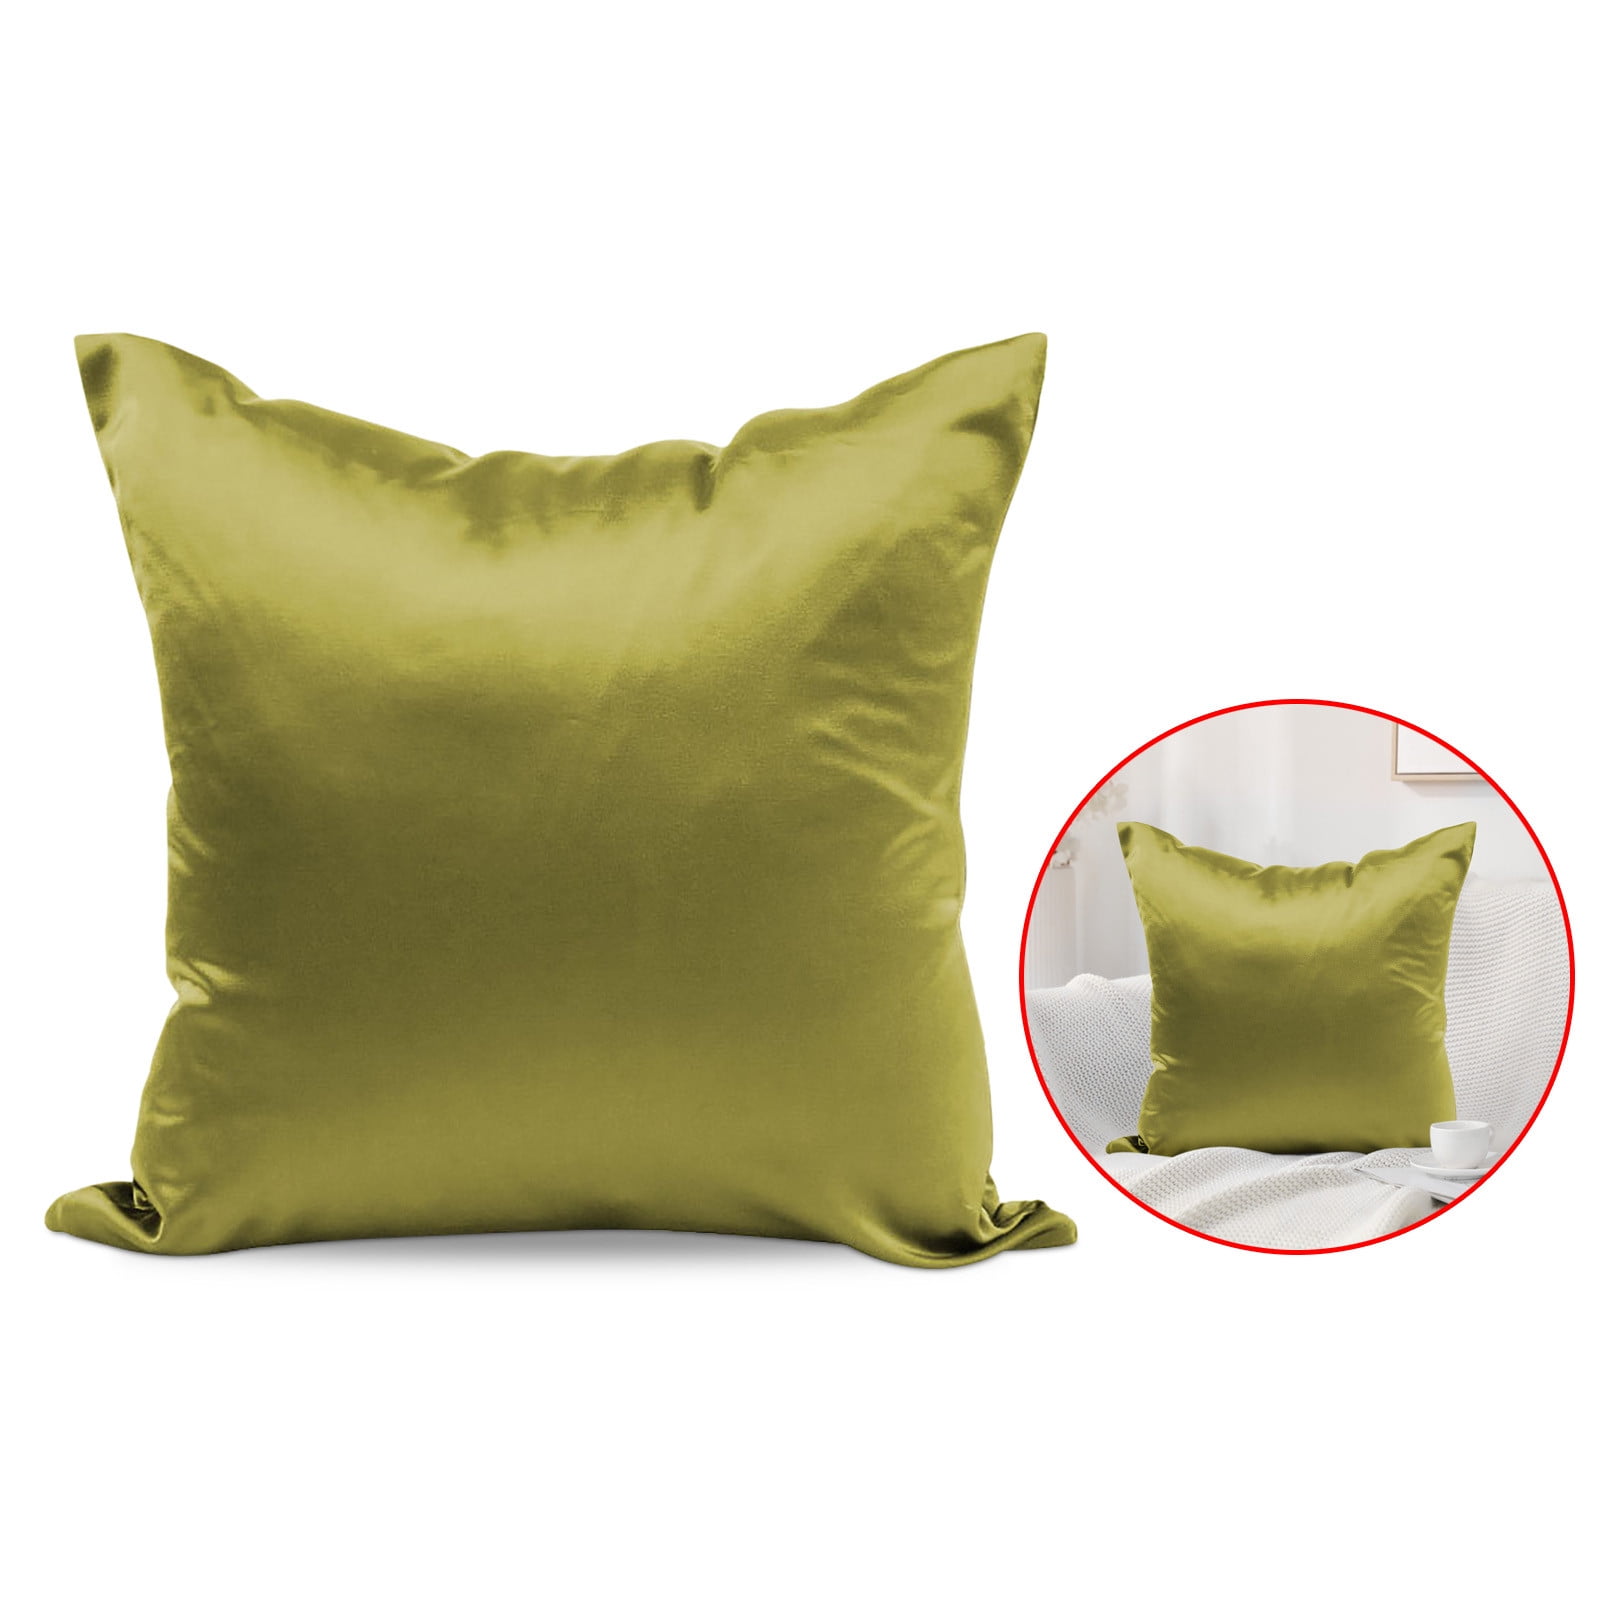 Teal, 12''x20'' YOUR SMILE Pack of 2 Velvet Pure Color Pillow Covers Decorative Square Pillowcase Soft Solid Cushion Case for Sofa Bedroom Car